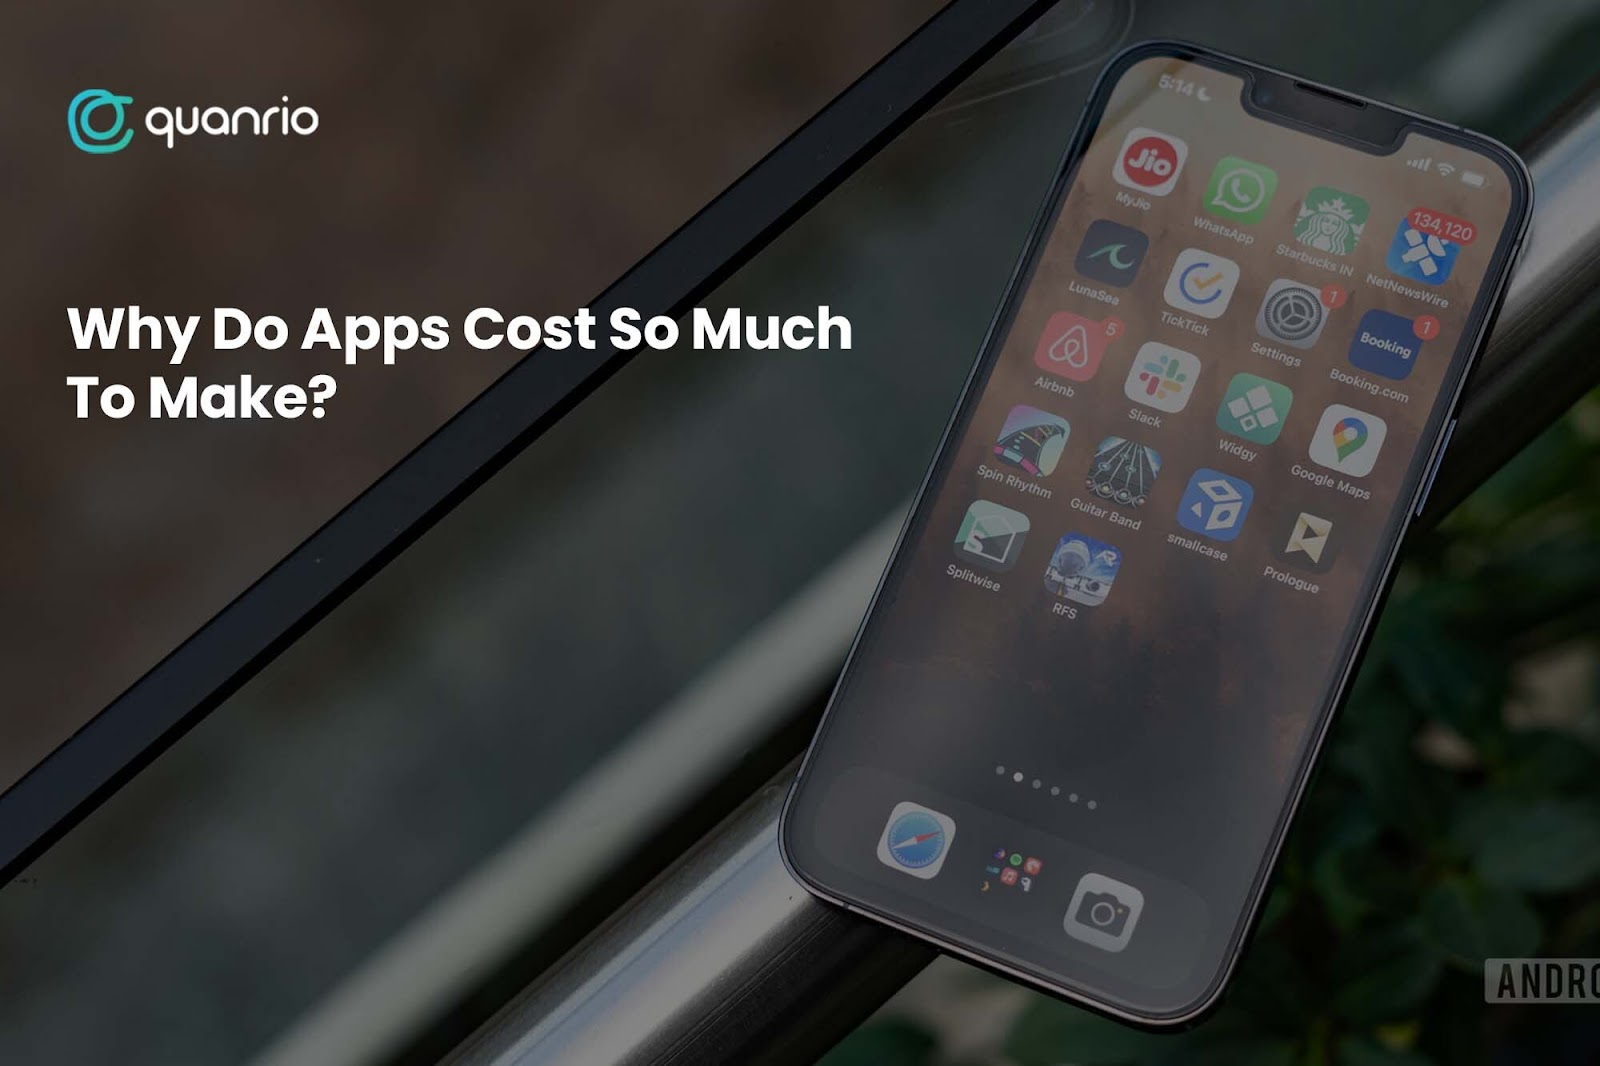 Why Do Apps Cost So Much To Make?